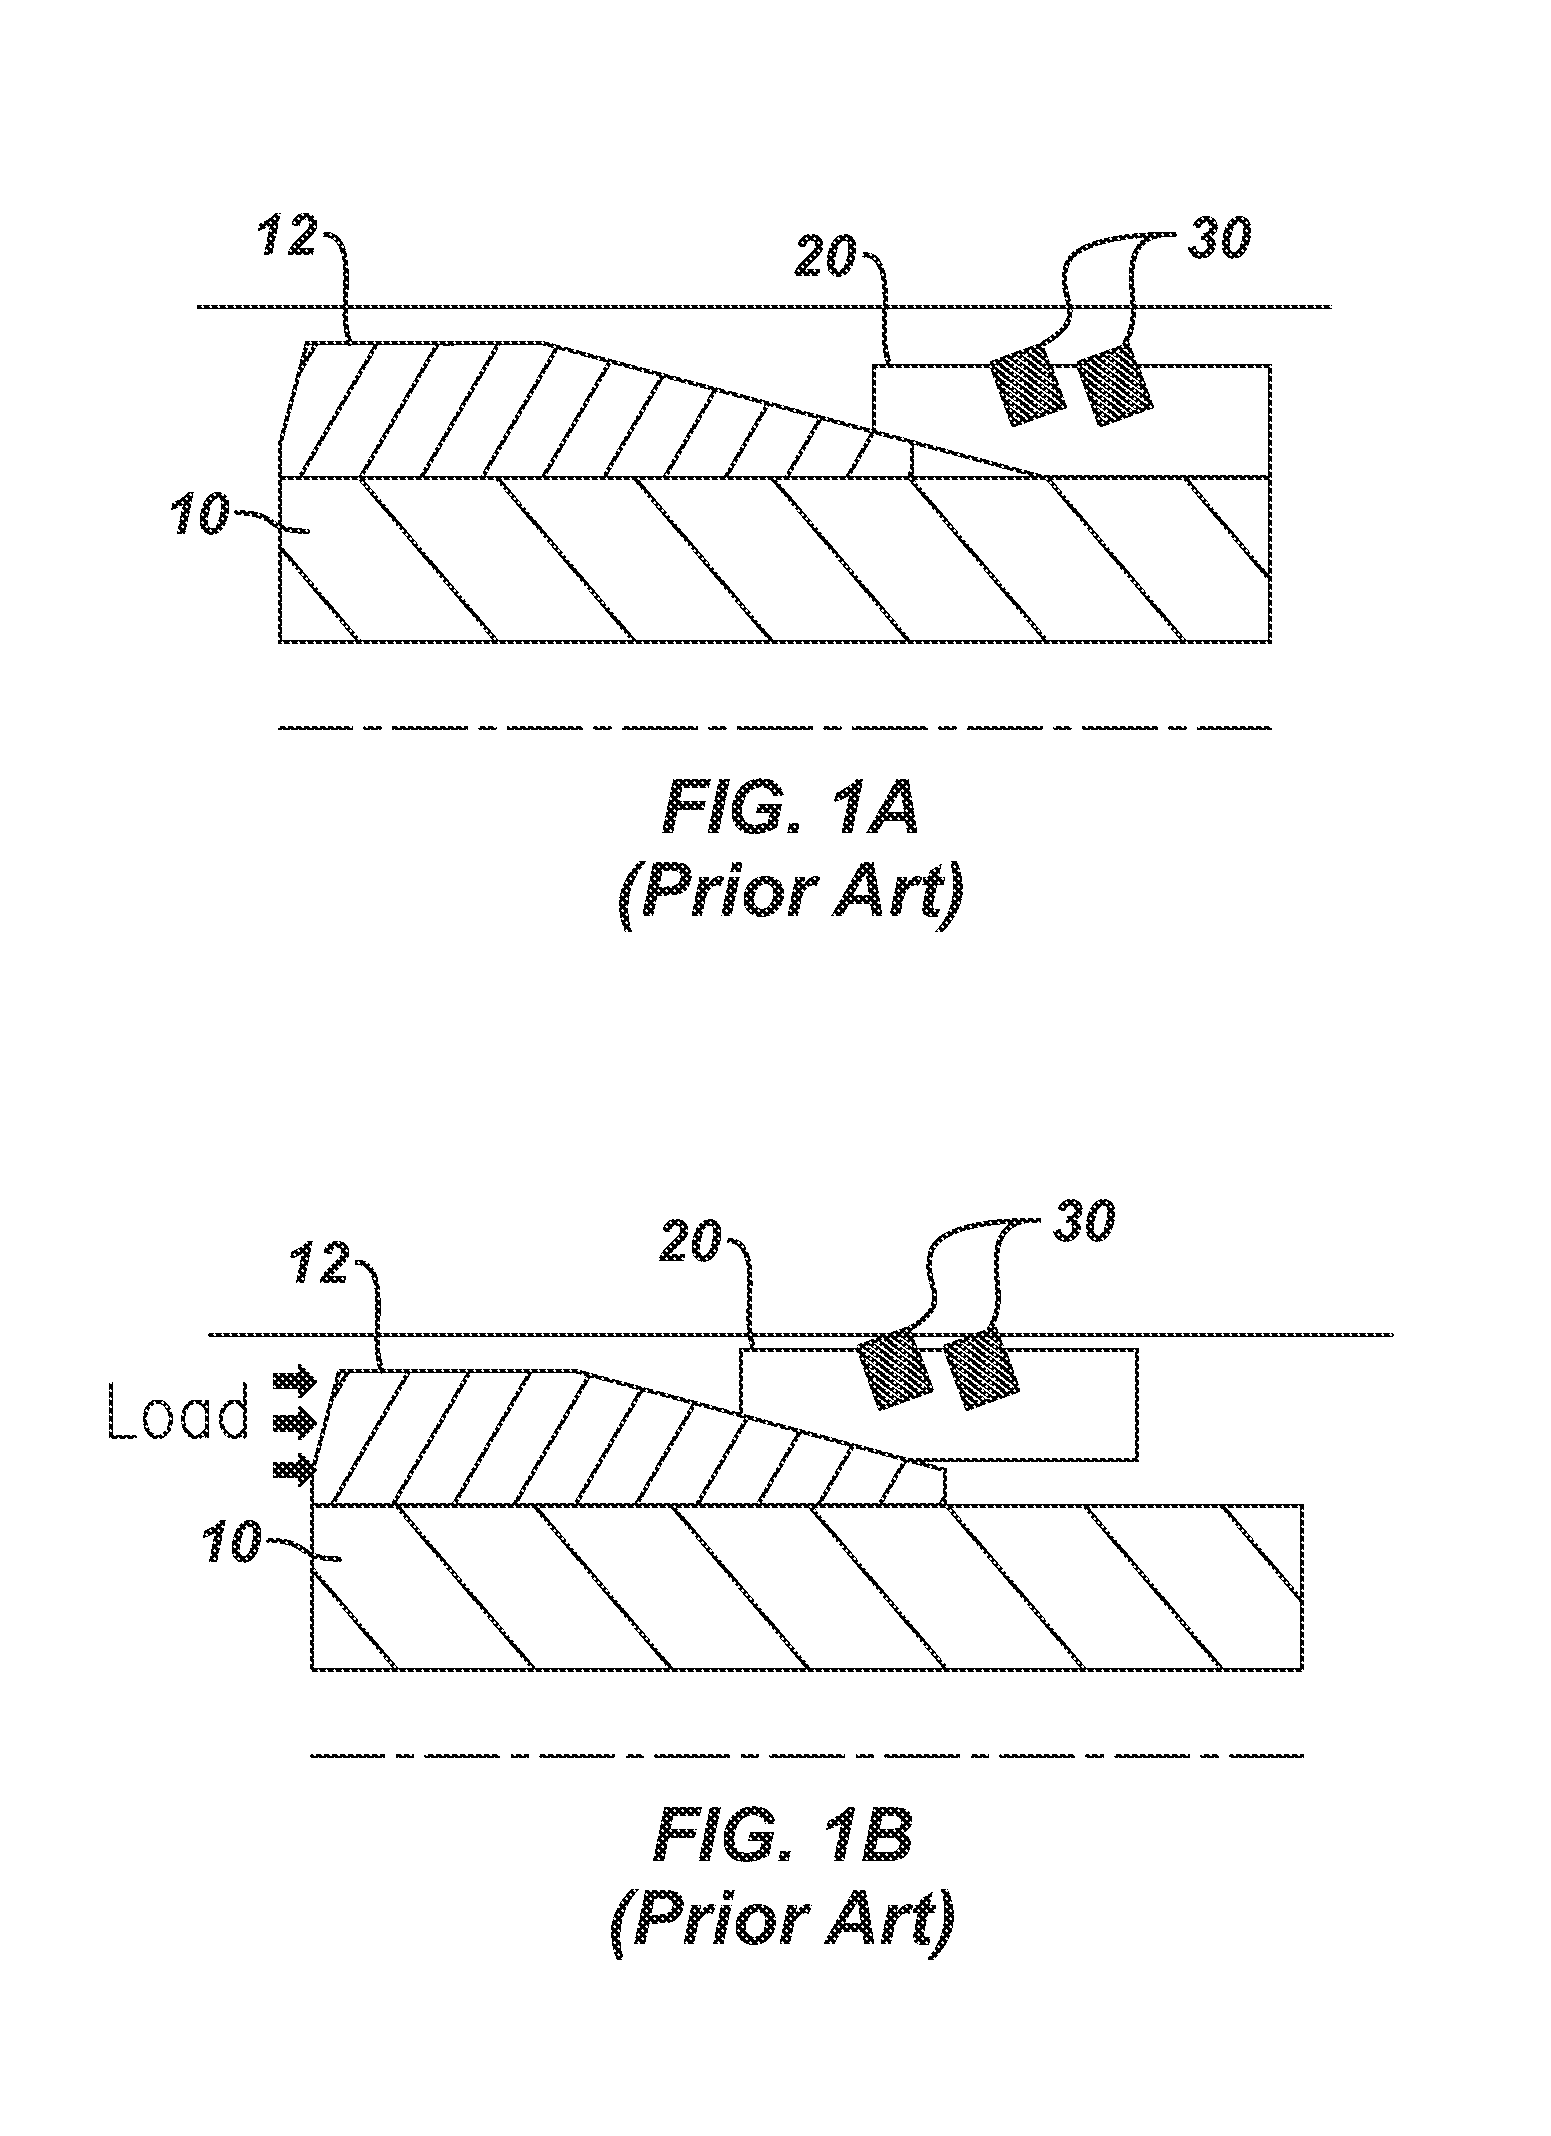 Downhole tool having slip inserts composed of different materials